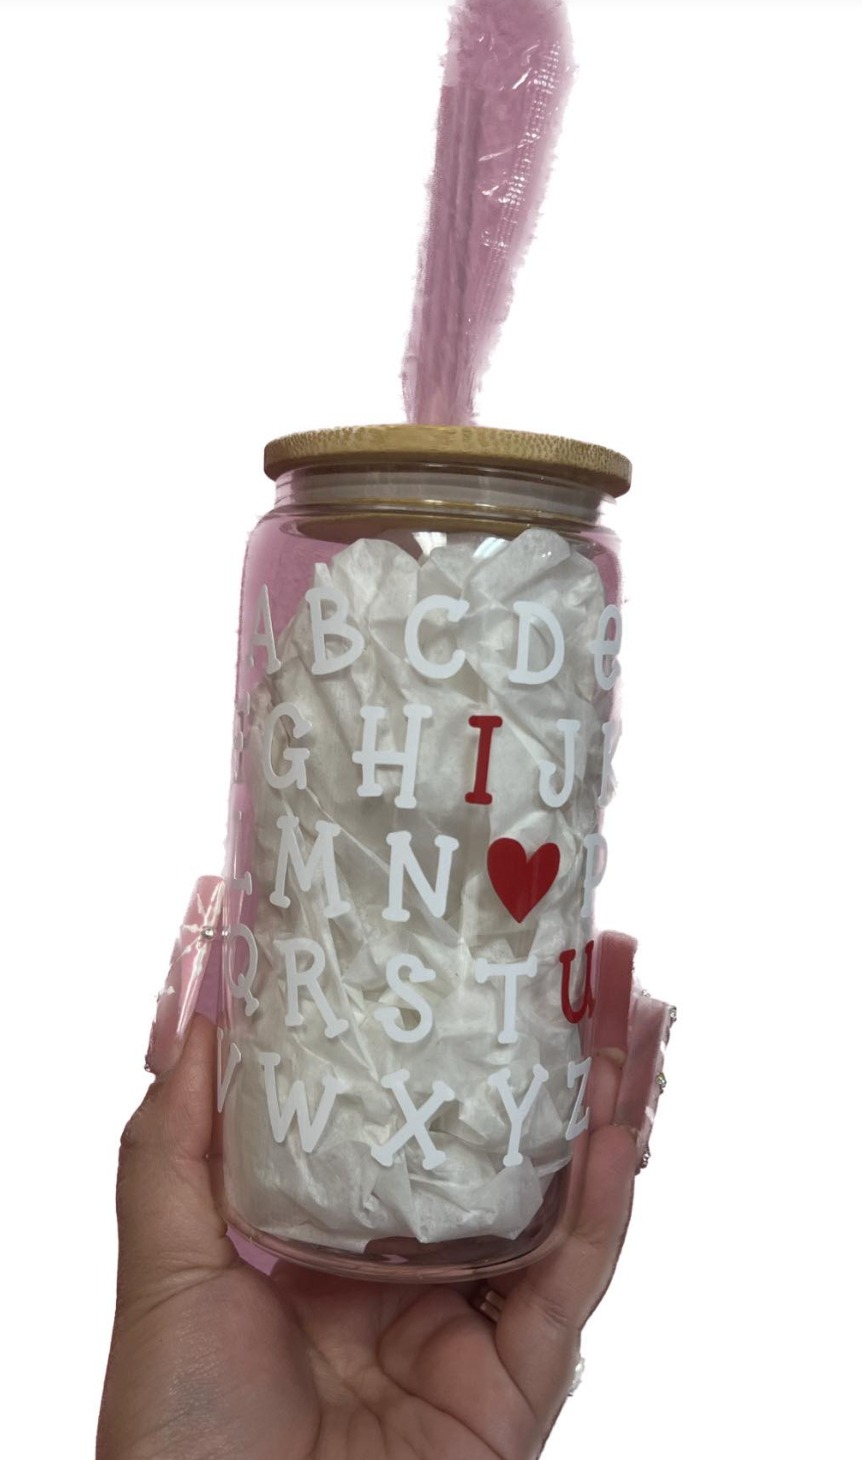 16oz ABC... in white letters